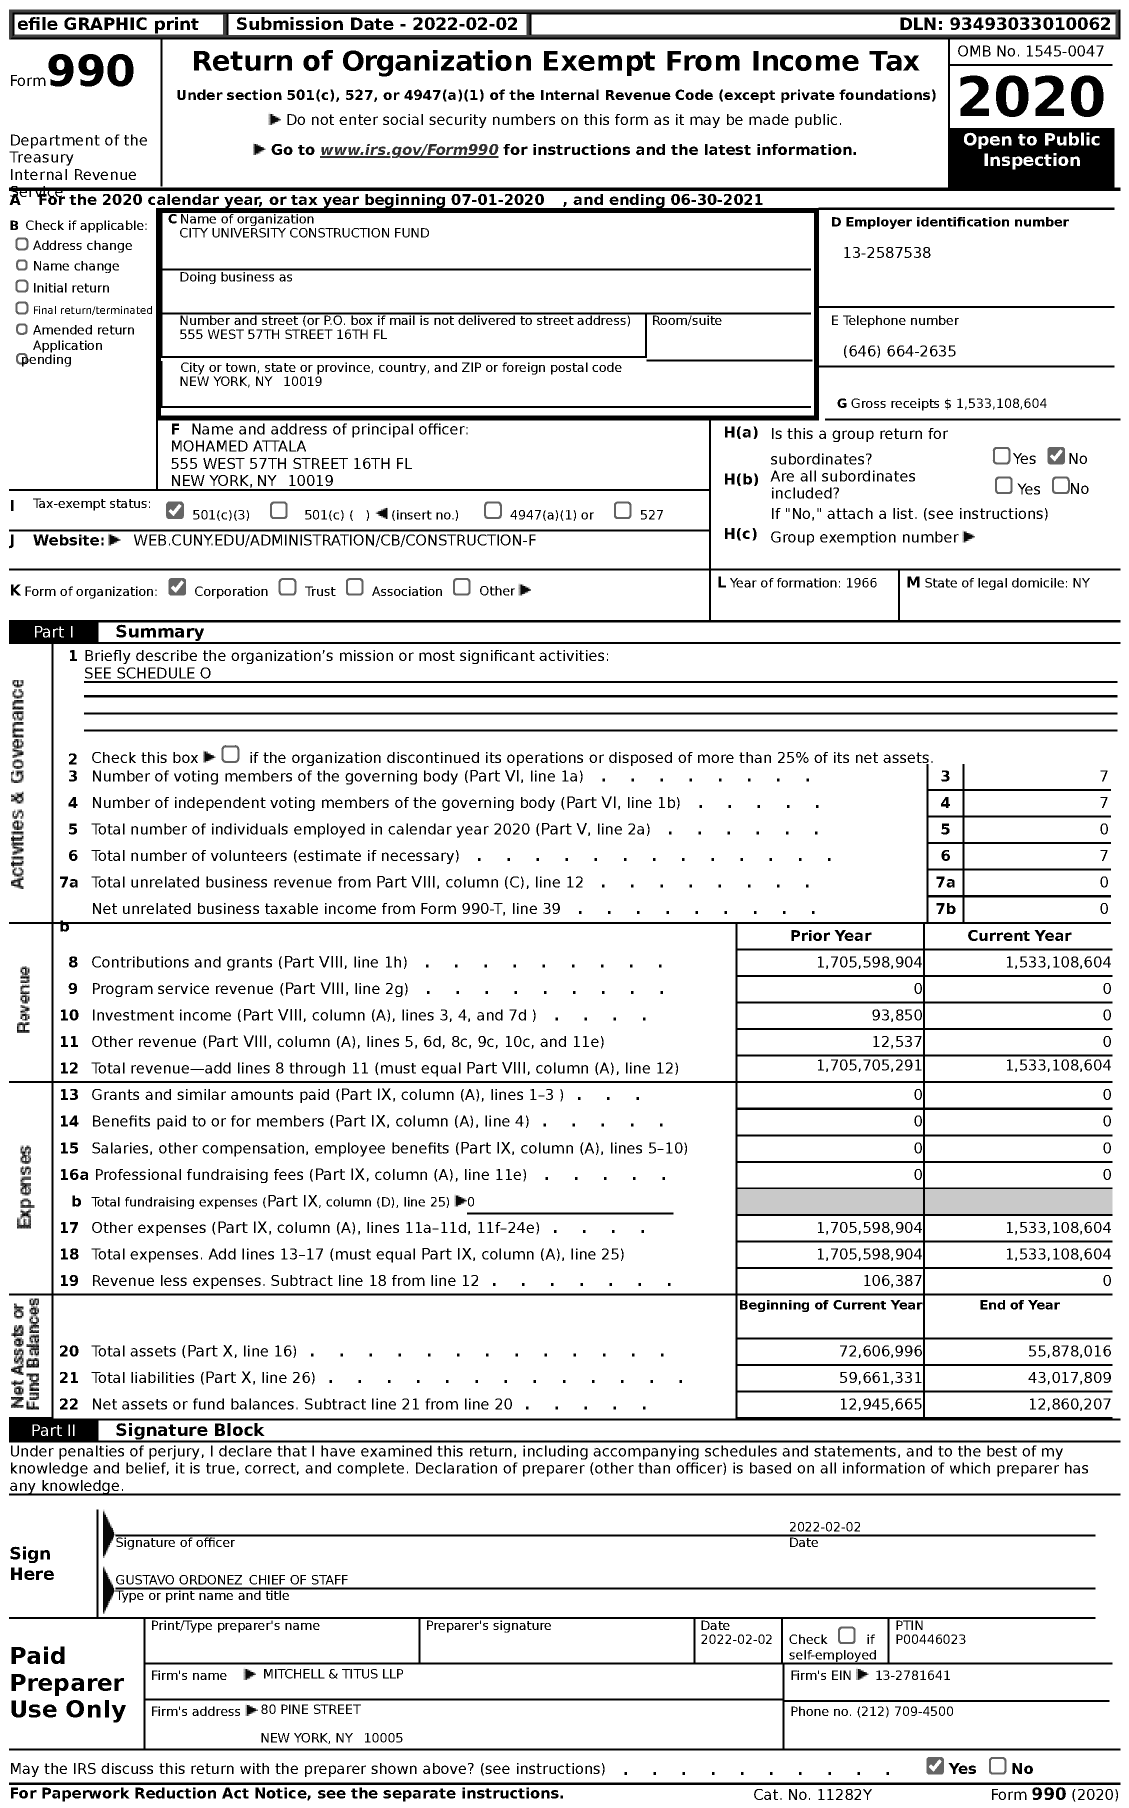 Image of first page of 2020 Form 990 for City University Construction Fund (CUCF)